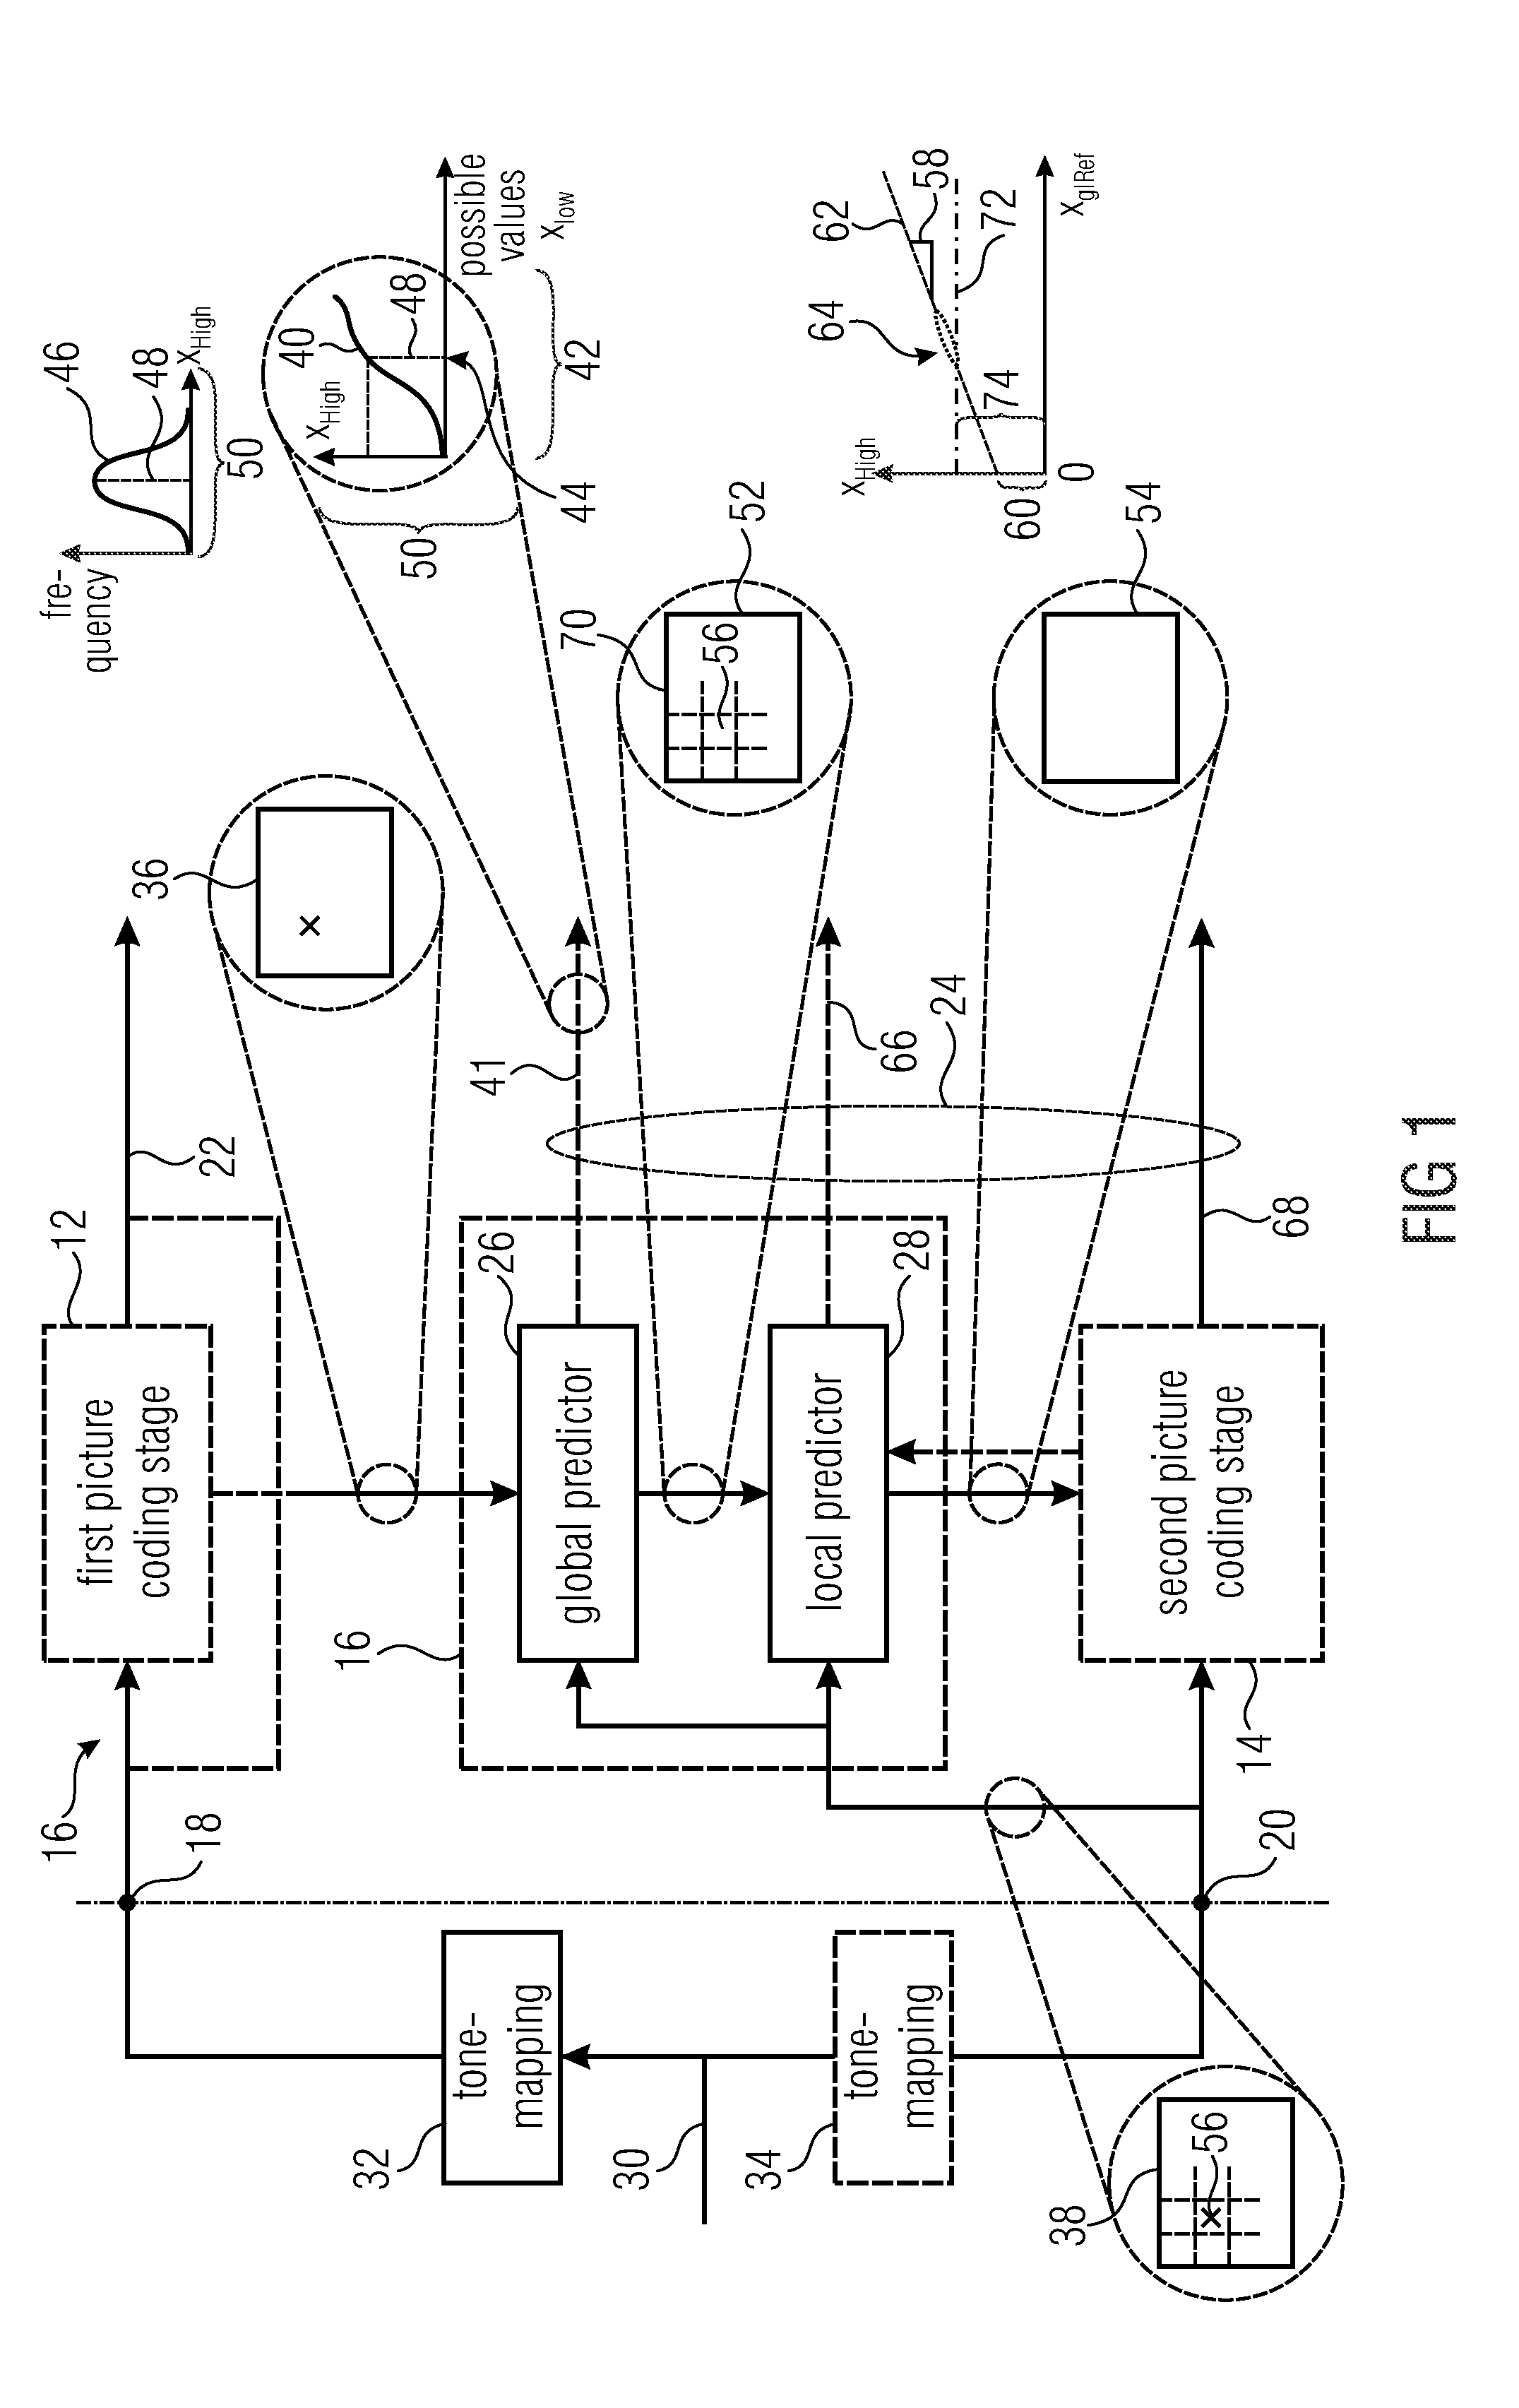 Inter-layer prediction between layers of different dynamic sample value range